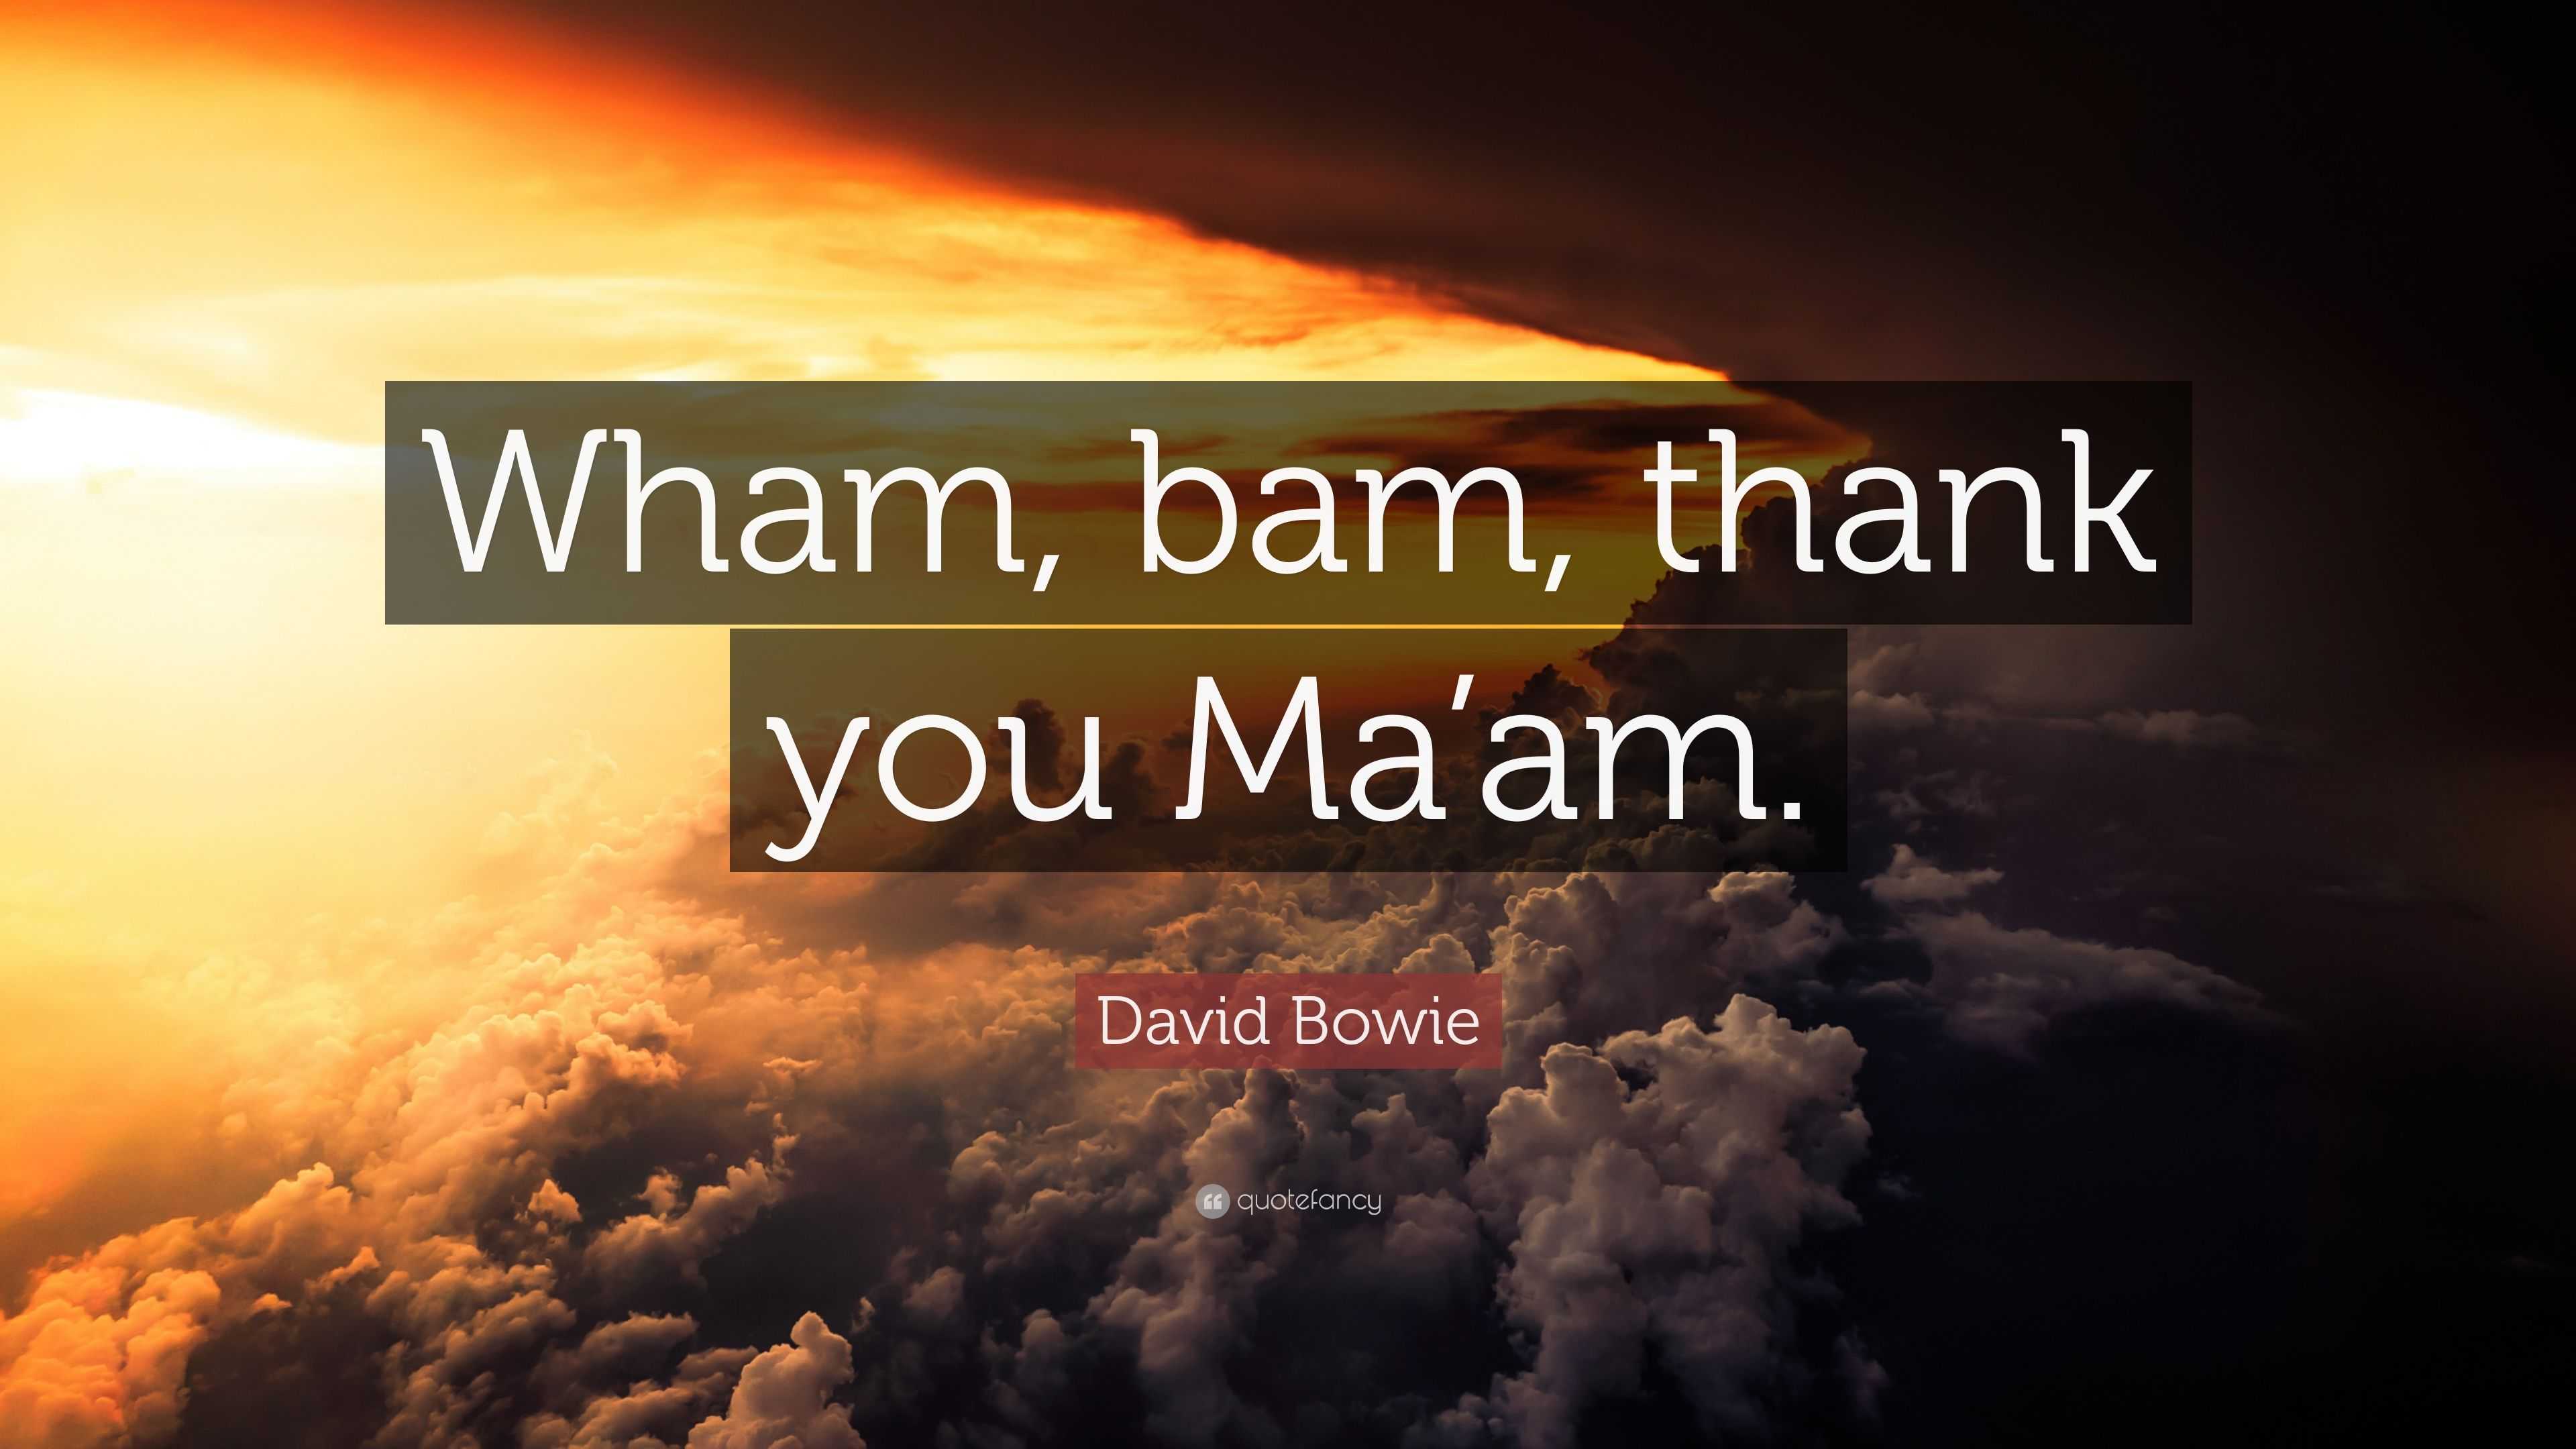 David Bowie Quote “wham Bam Thank You Maam” 9111